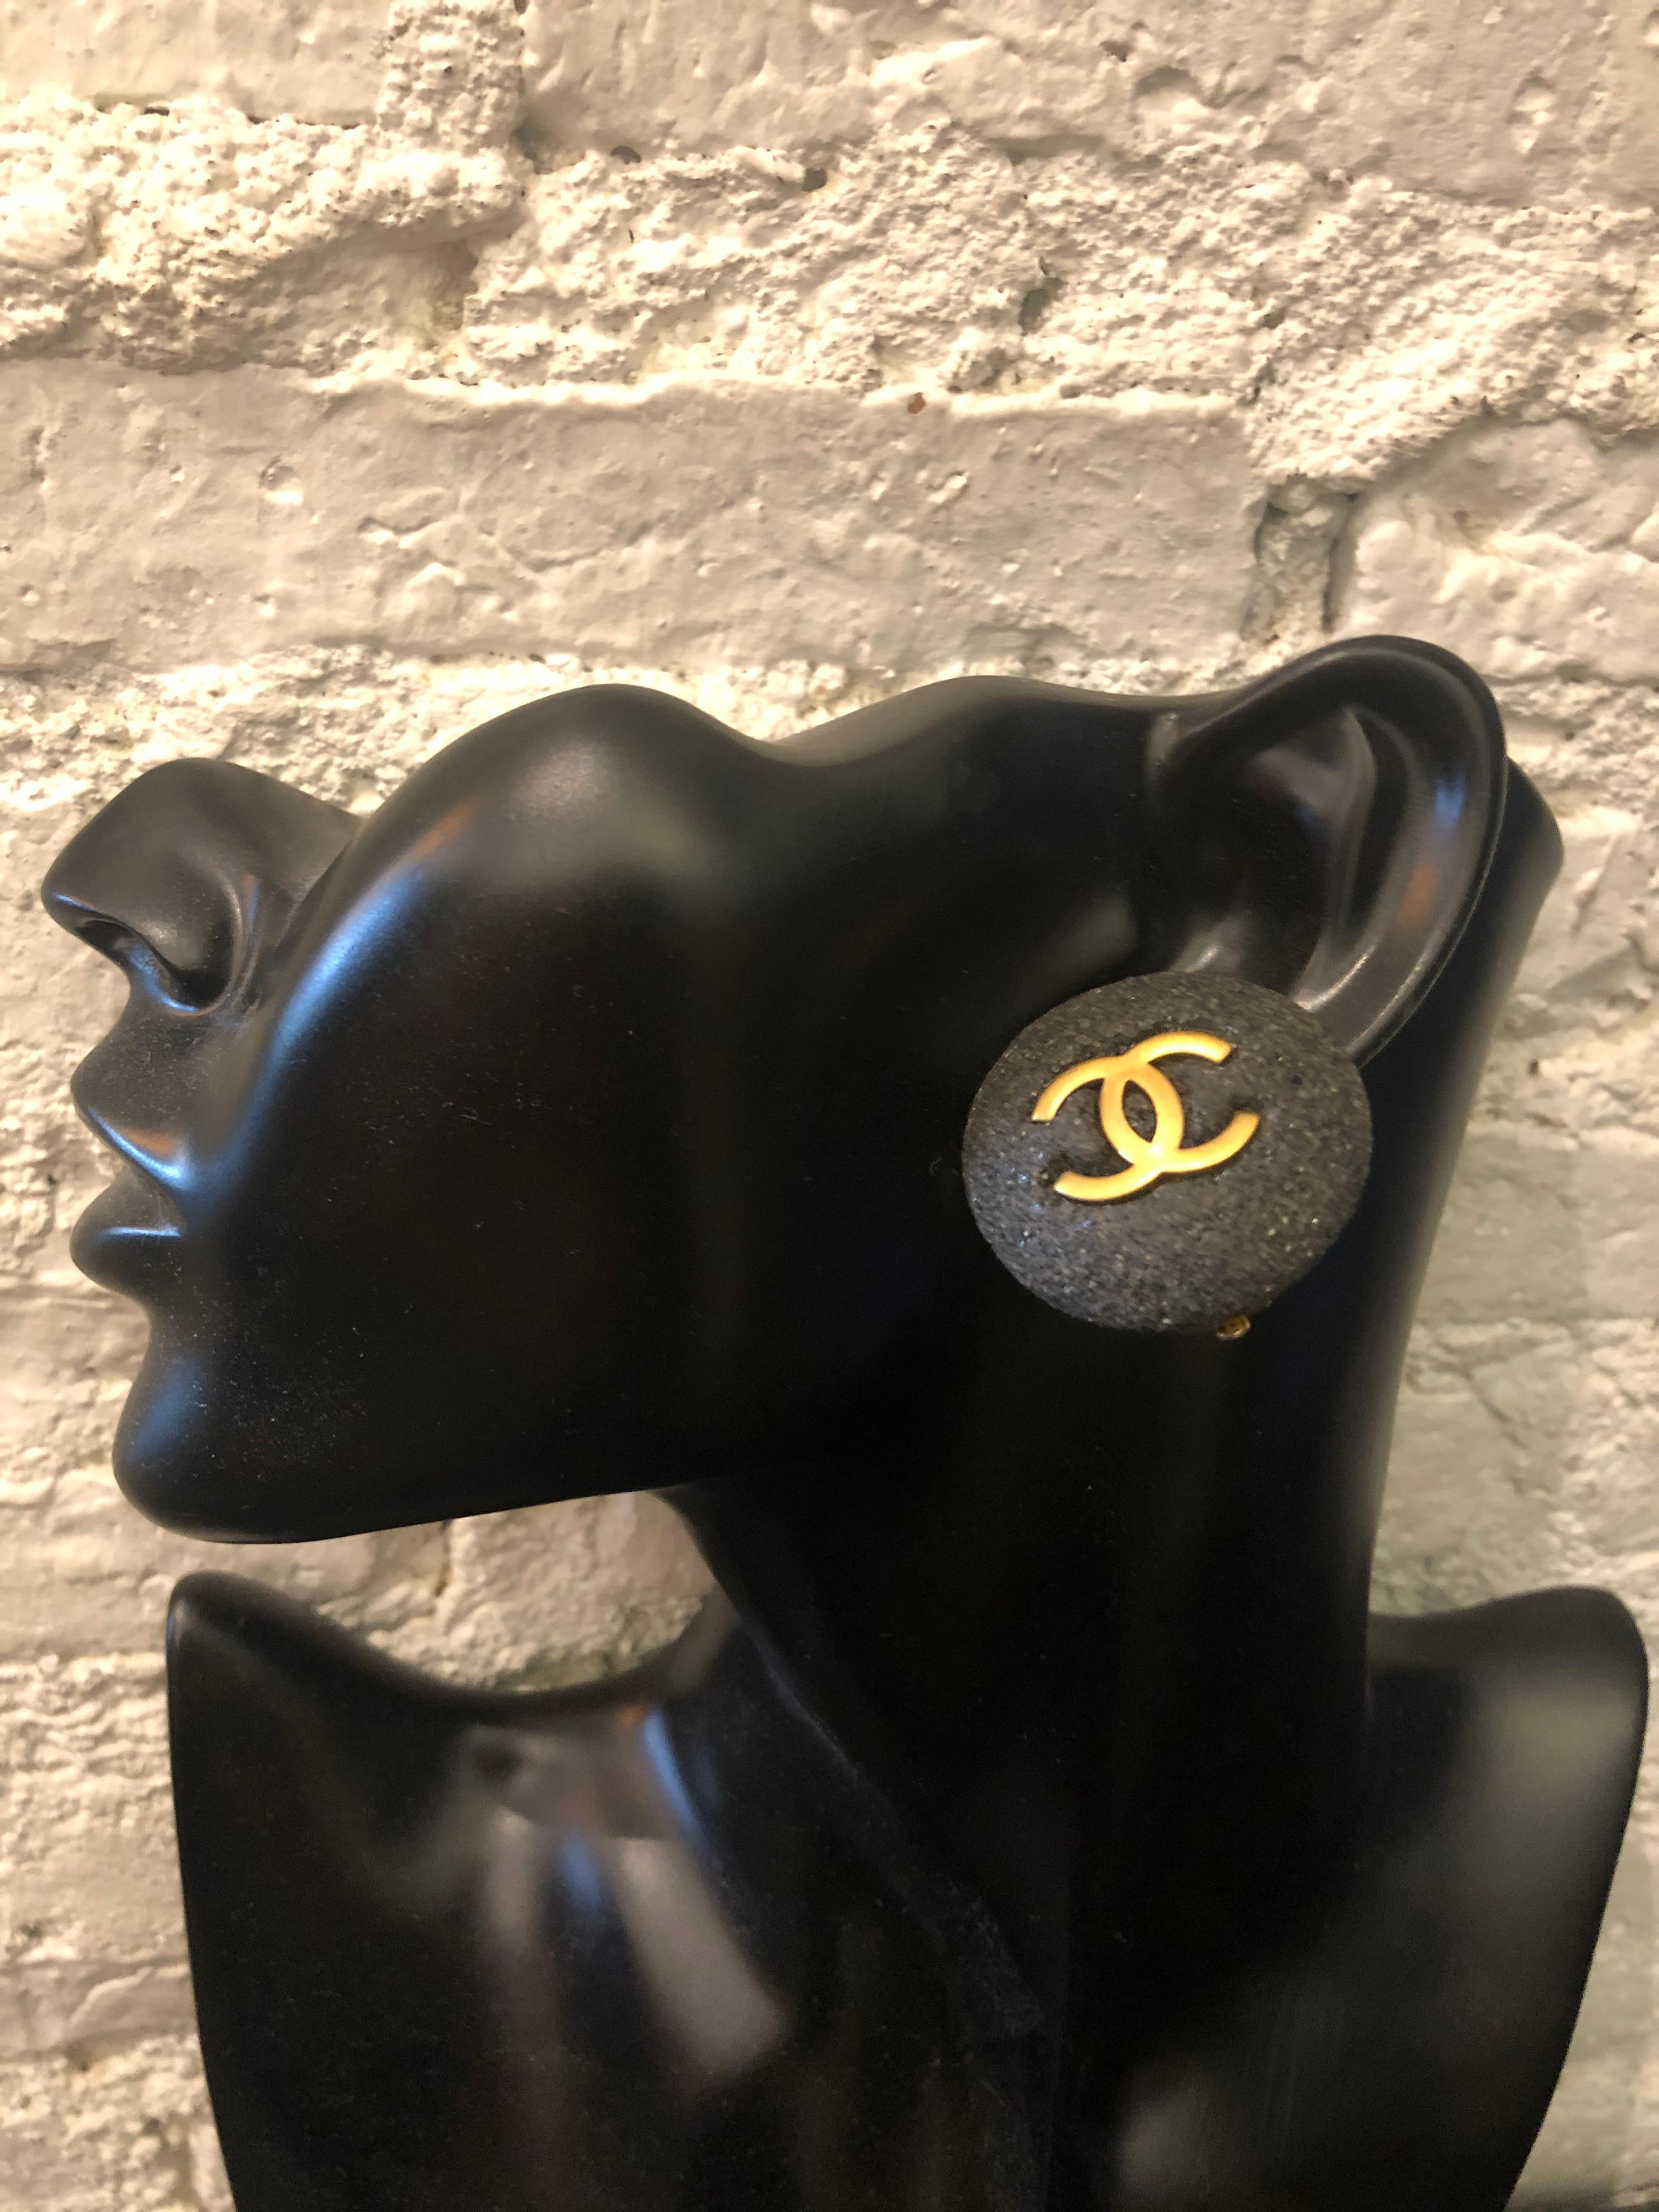 1990s CHANEL clip-on earrings in gray stone setting with a gold toned CC logo. Stamped CHANEL made in France. Diameter measures approximately 3.3 cm. Come with box. 

Condition - Minor scratches consistent with age and normal use. Generally in good